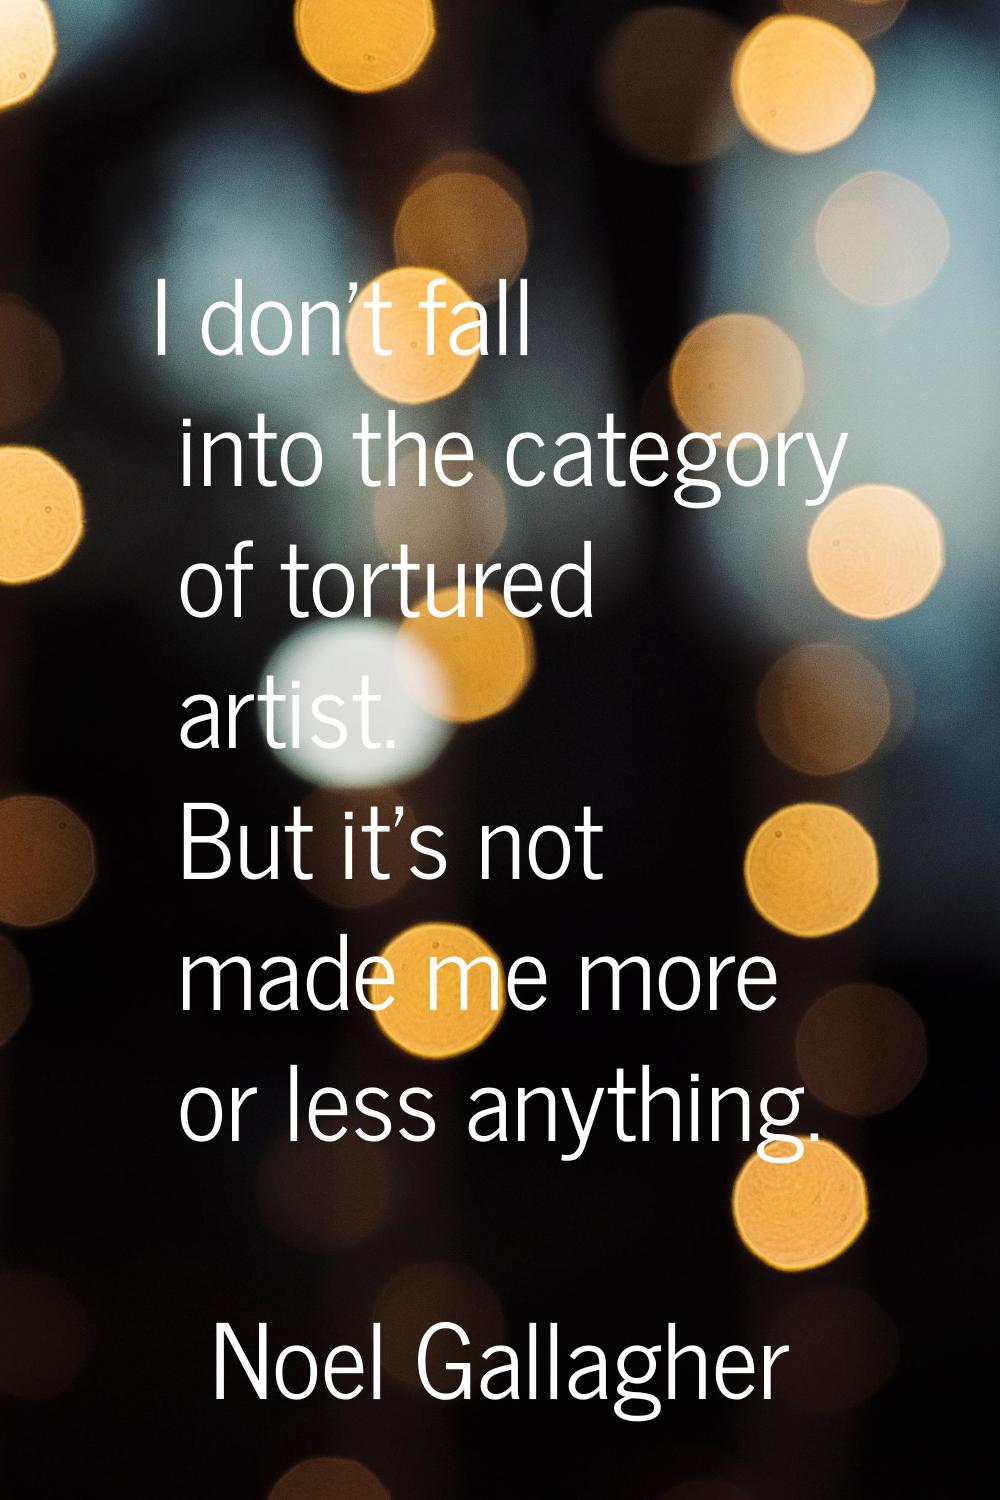 I don't fall into the category of tortured artist. But it's not made me more or less anything.